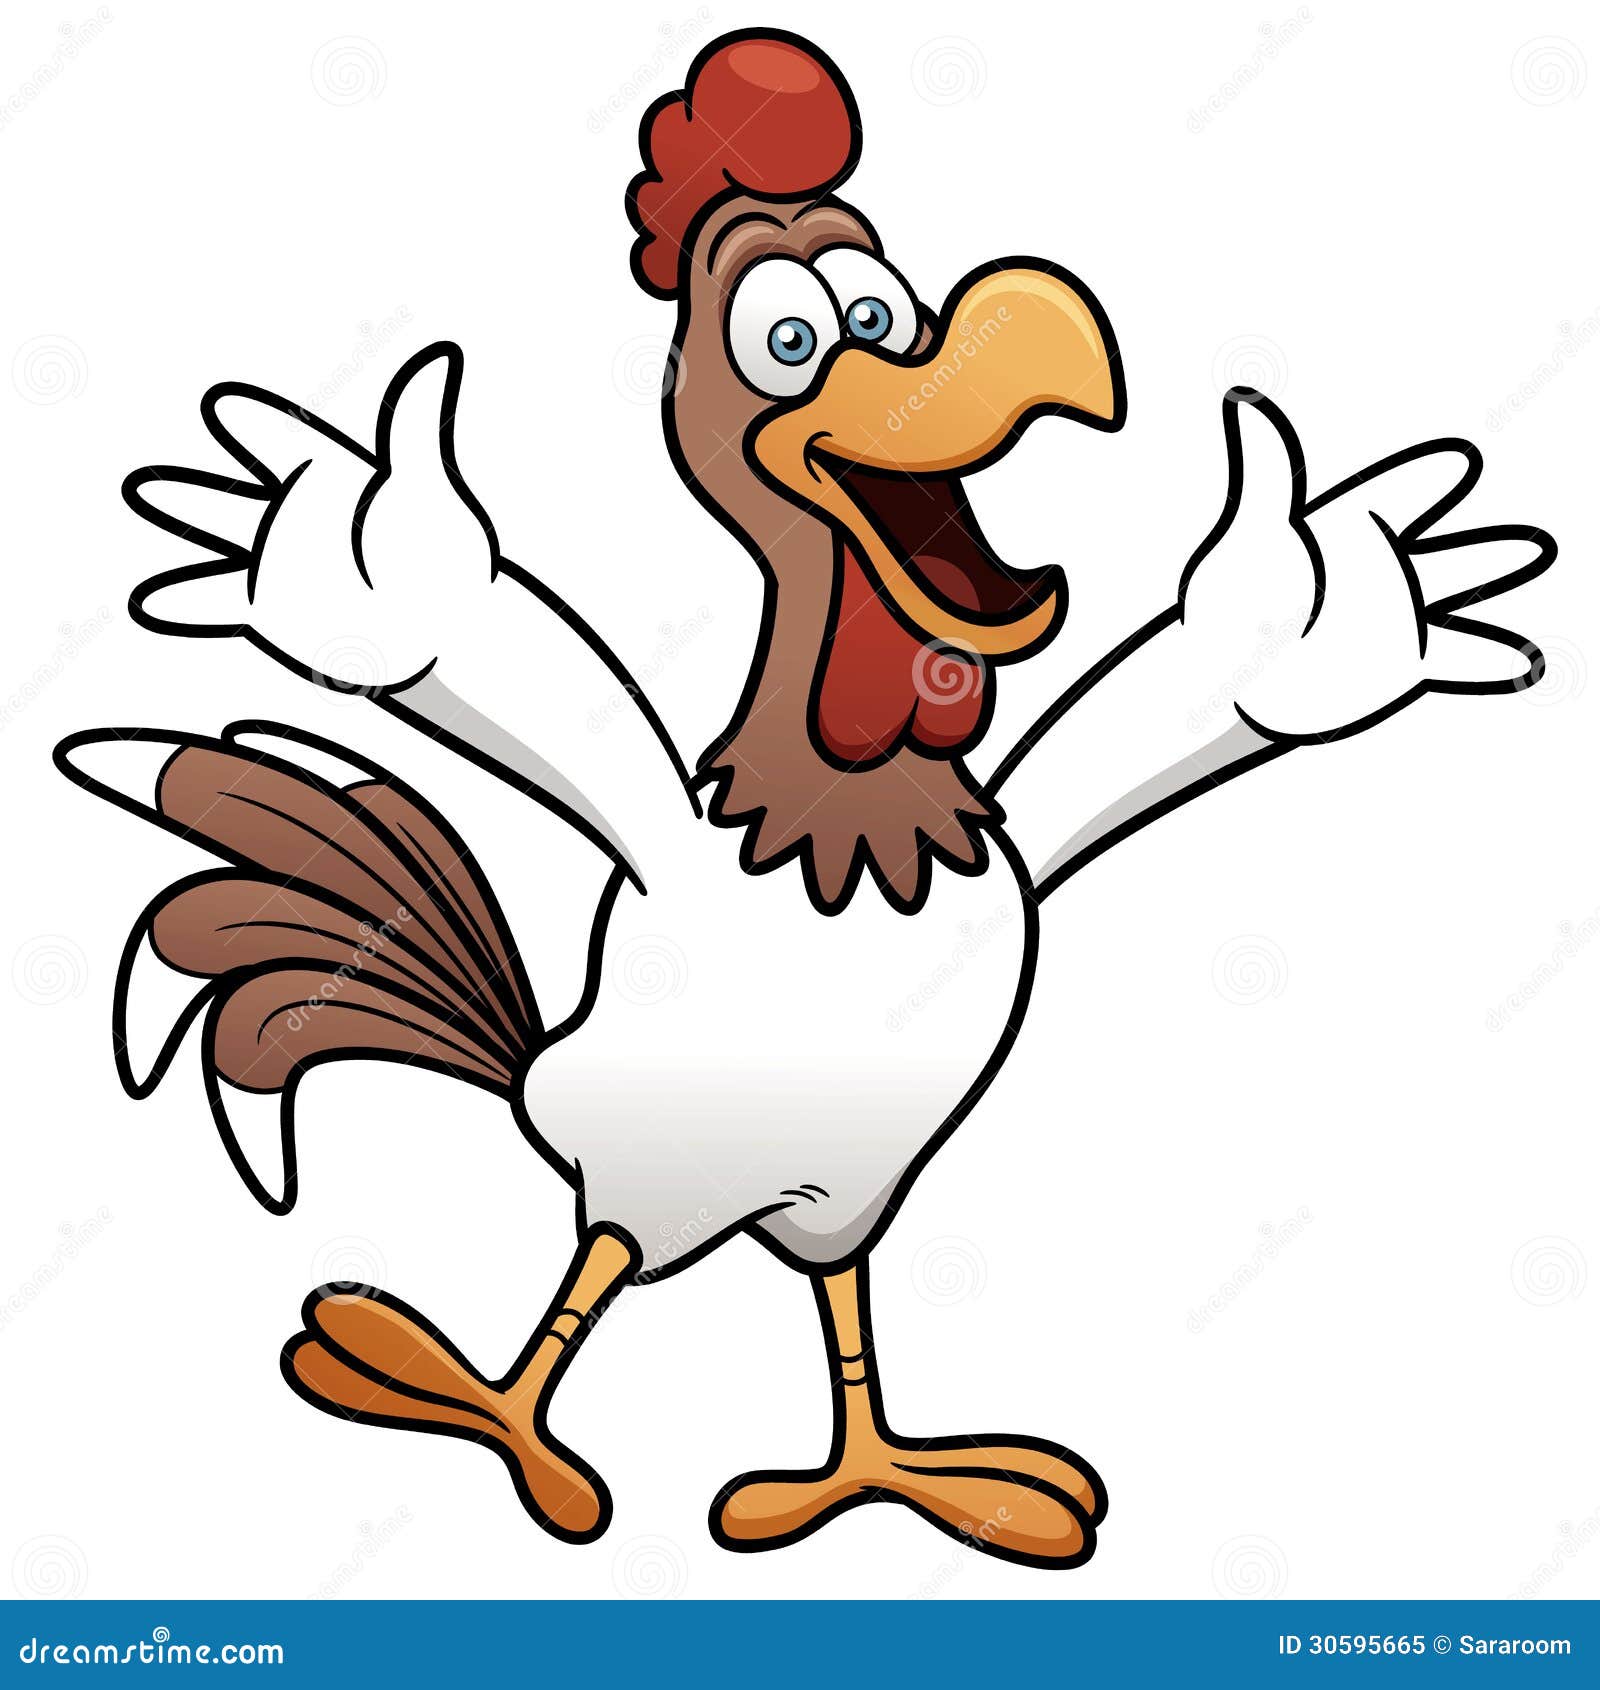 chicken lady clipart - photo #10